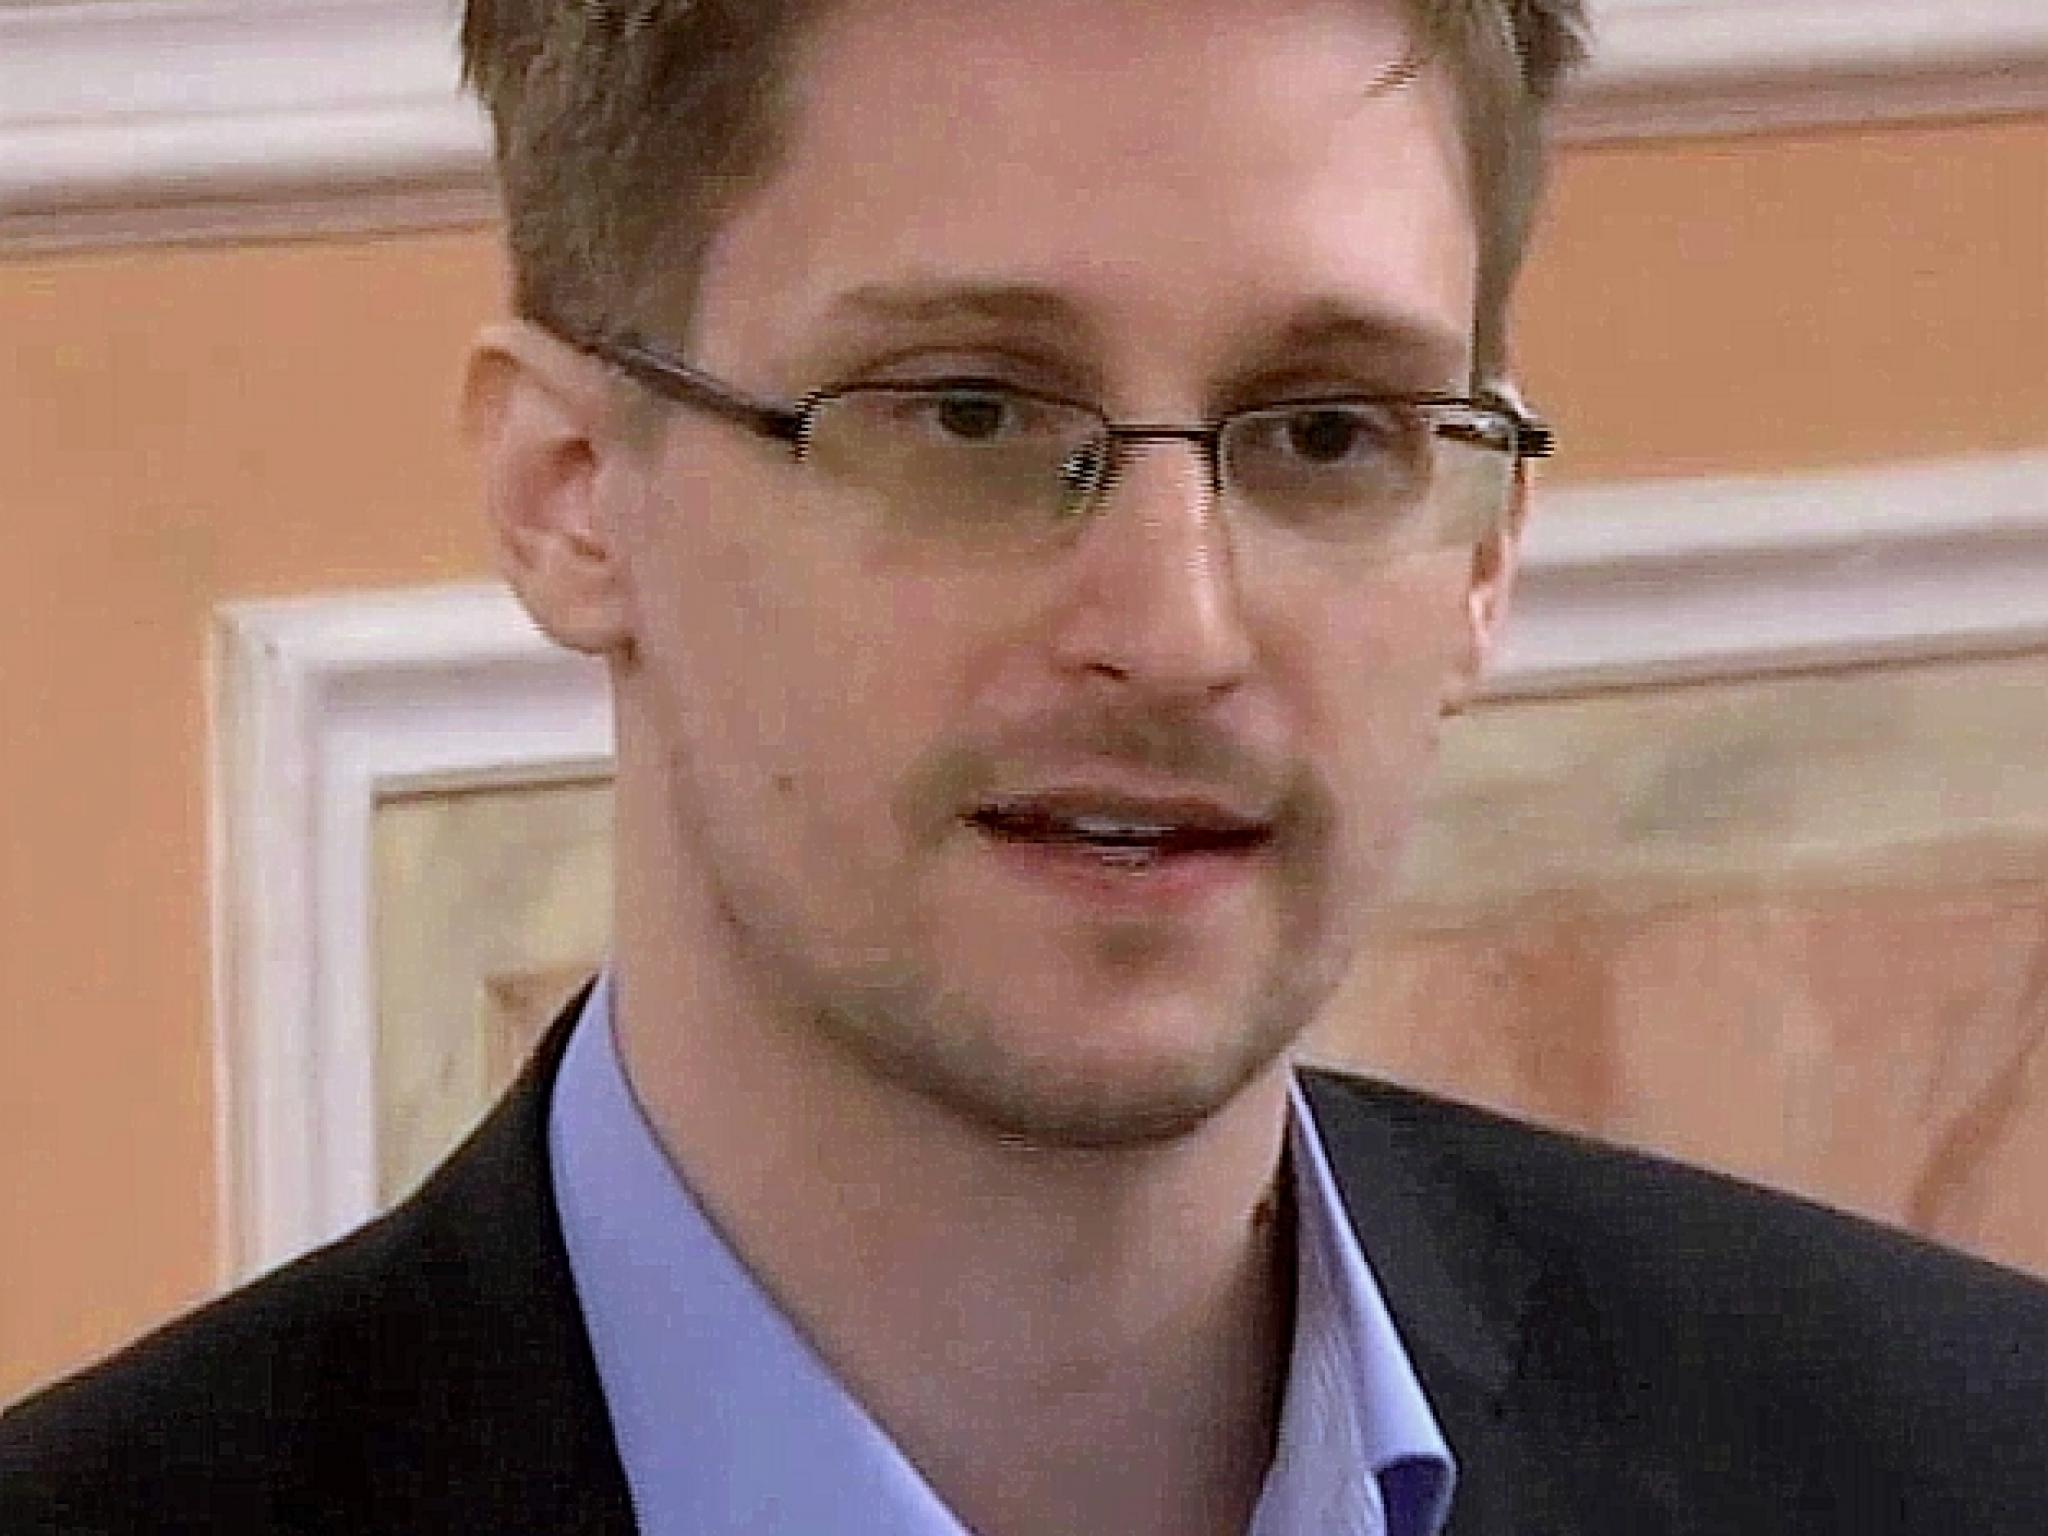  edward-snowden-takes-a-jab-at-elizabeth-warrens-anti-bitcoin-stance-through-the-infamous-were-all-going-to-die-remark-broadcast-on-china-controlled-tv 